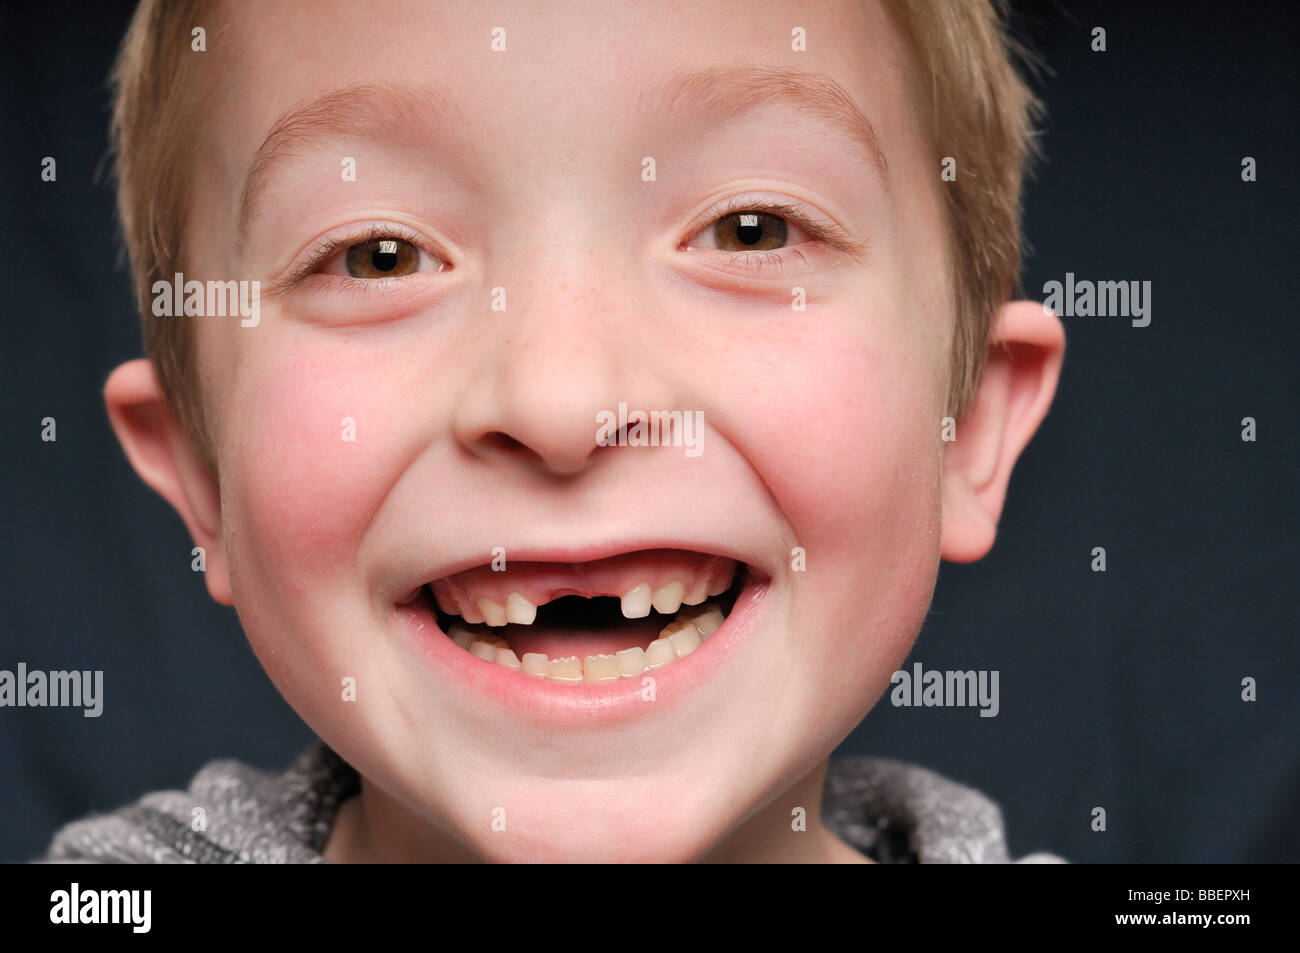 Portrait Of A Little Boy Missing Two Front Teeth Stock Photo Alamy